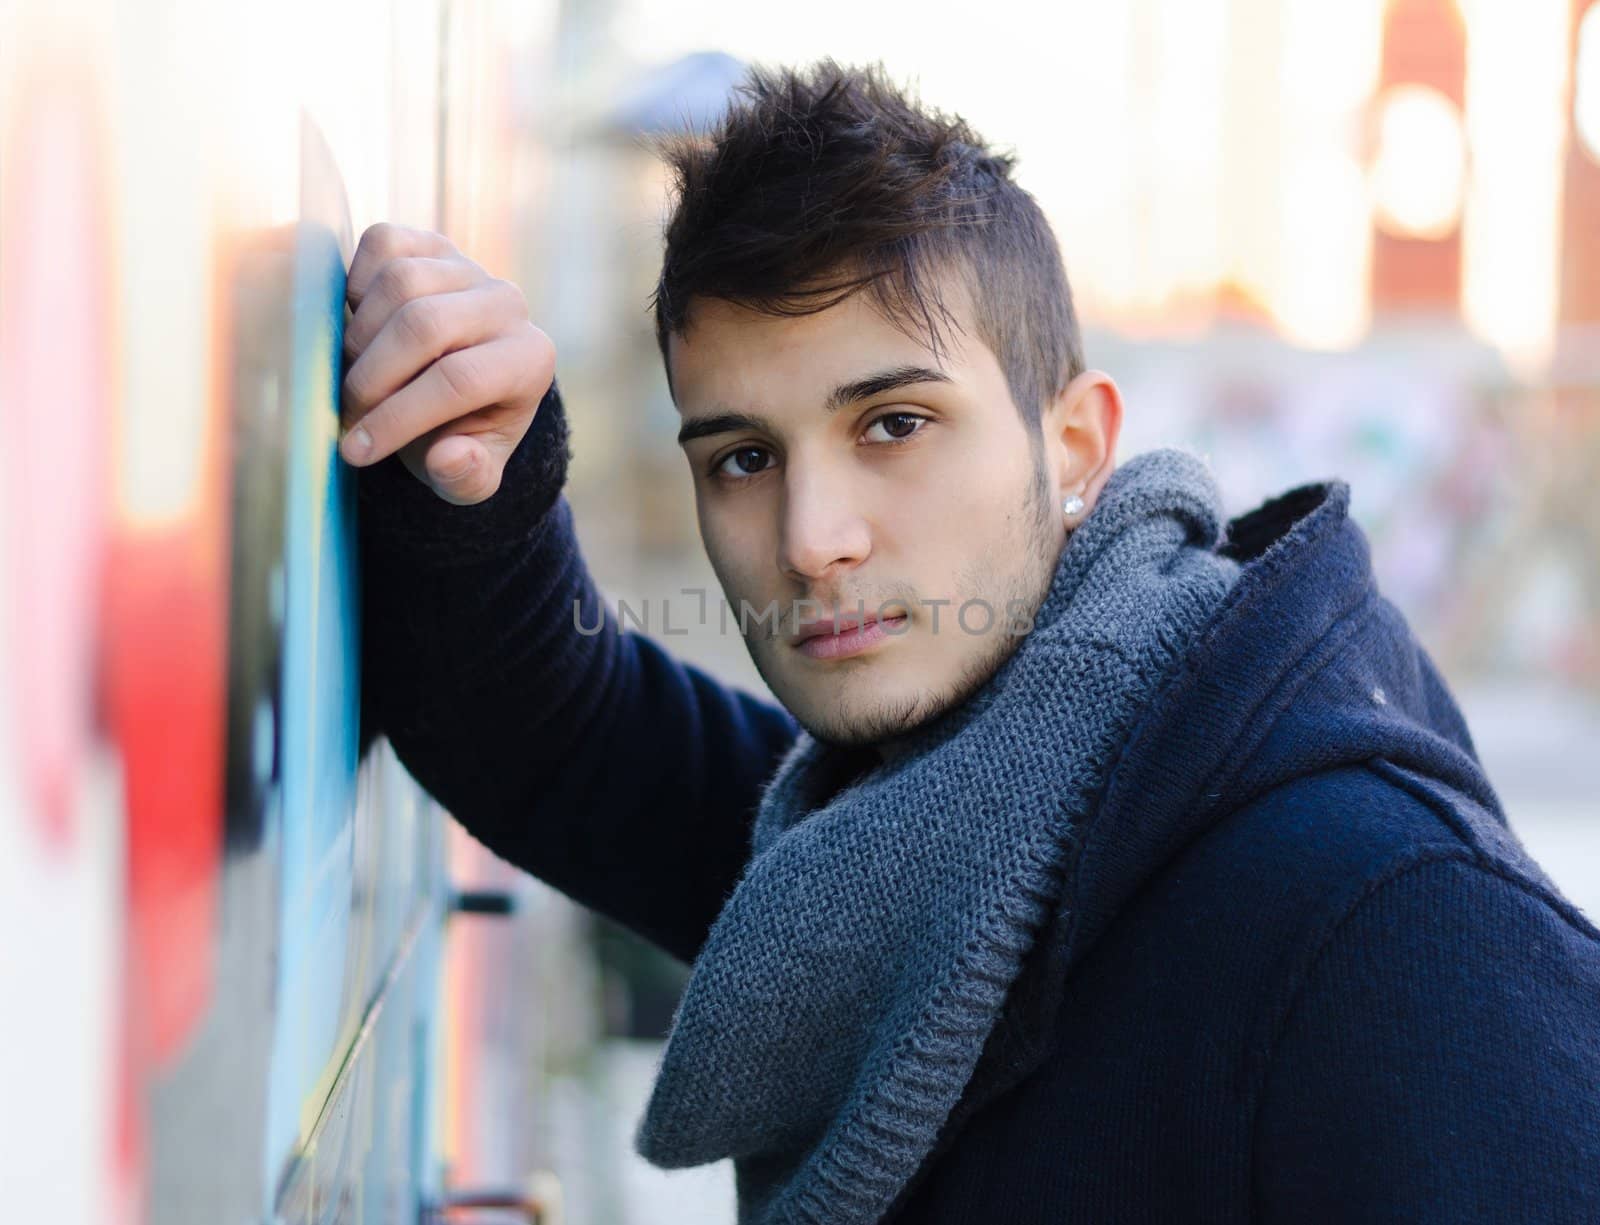 Handsome young man against colorful wall by artofphoto